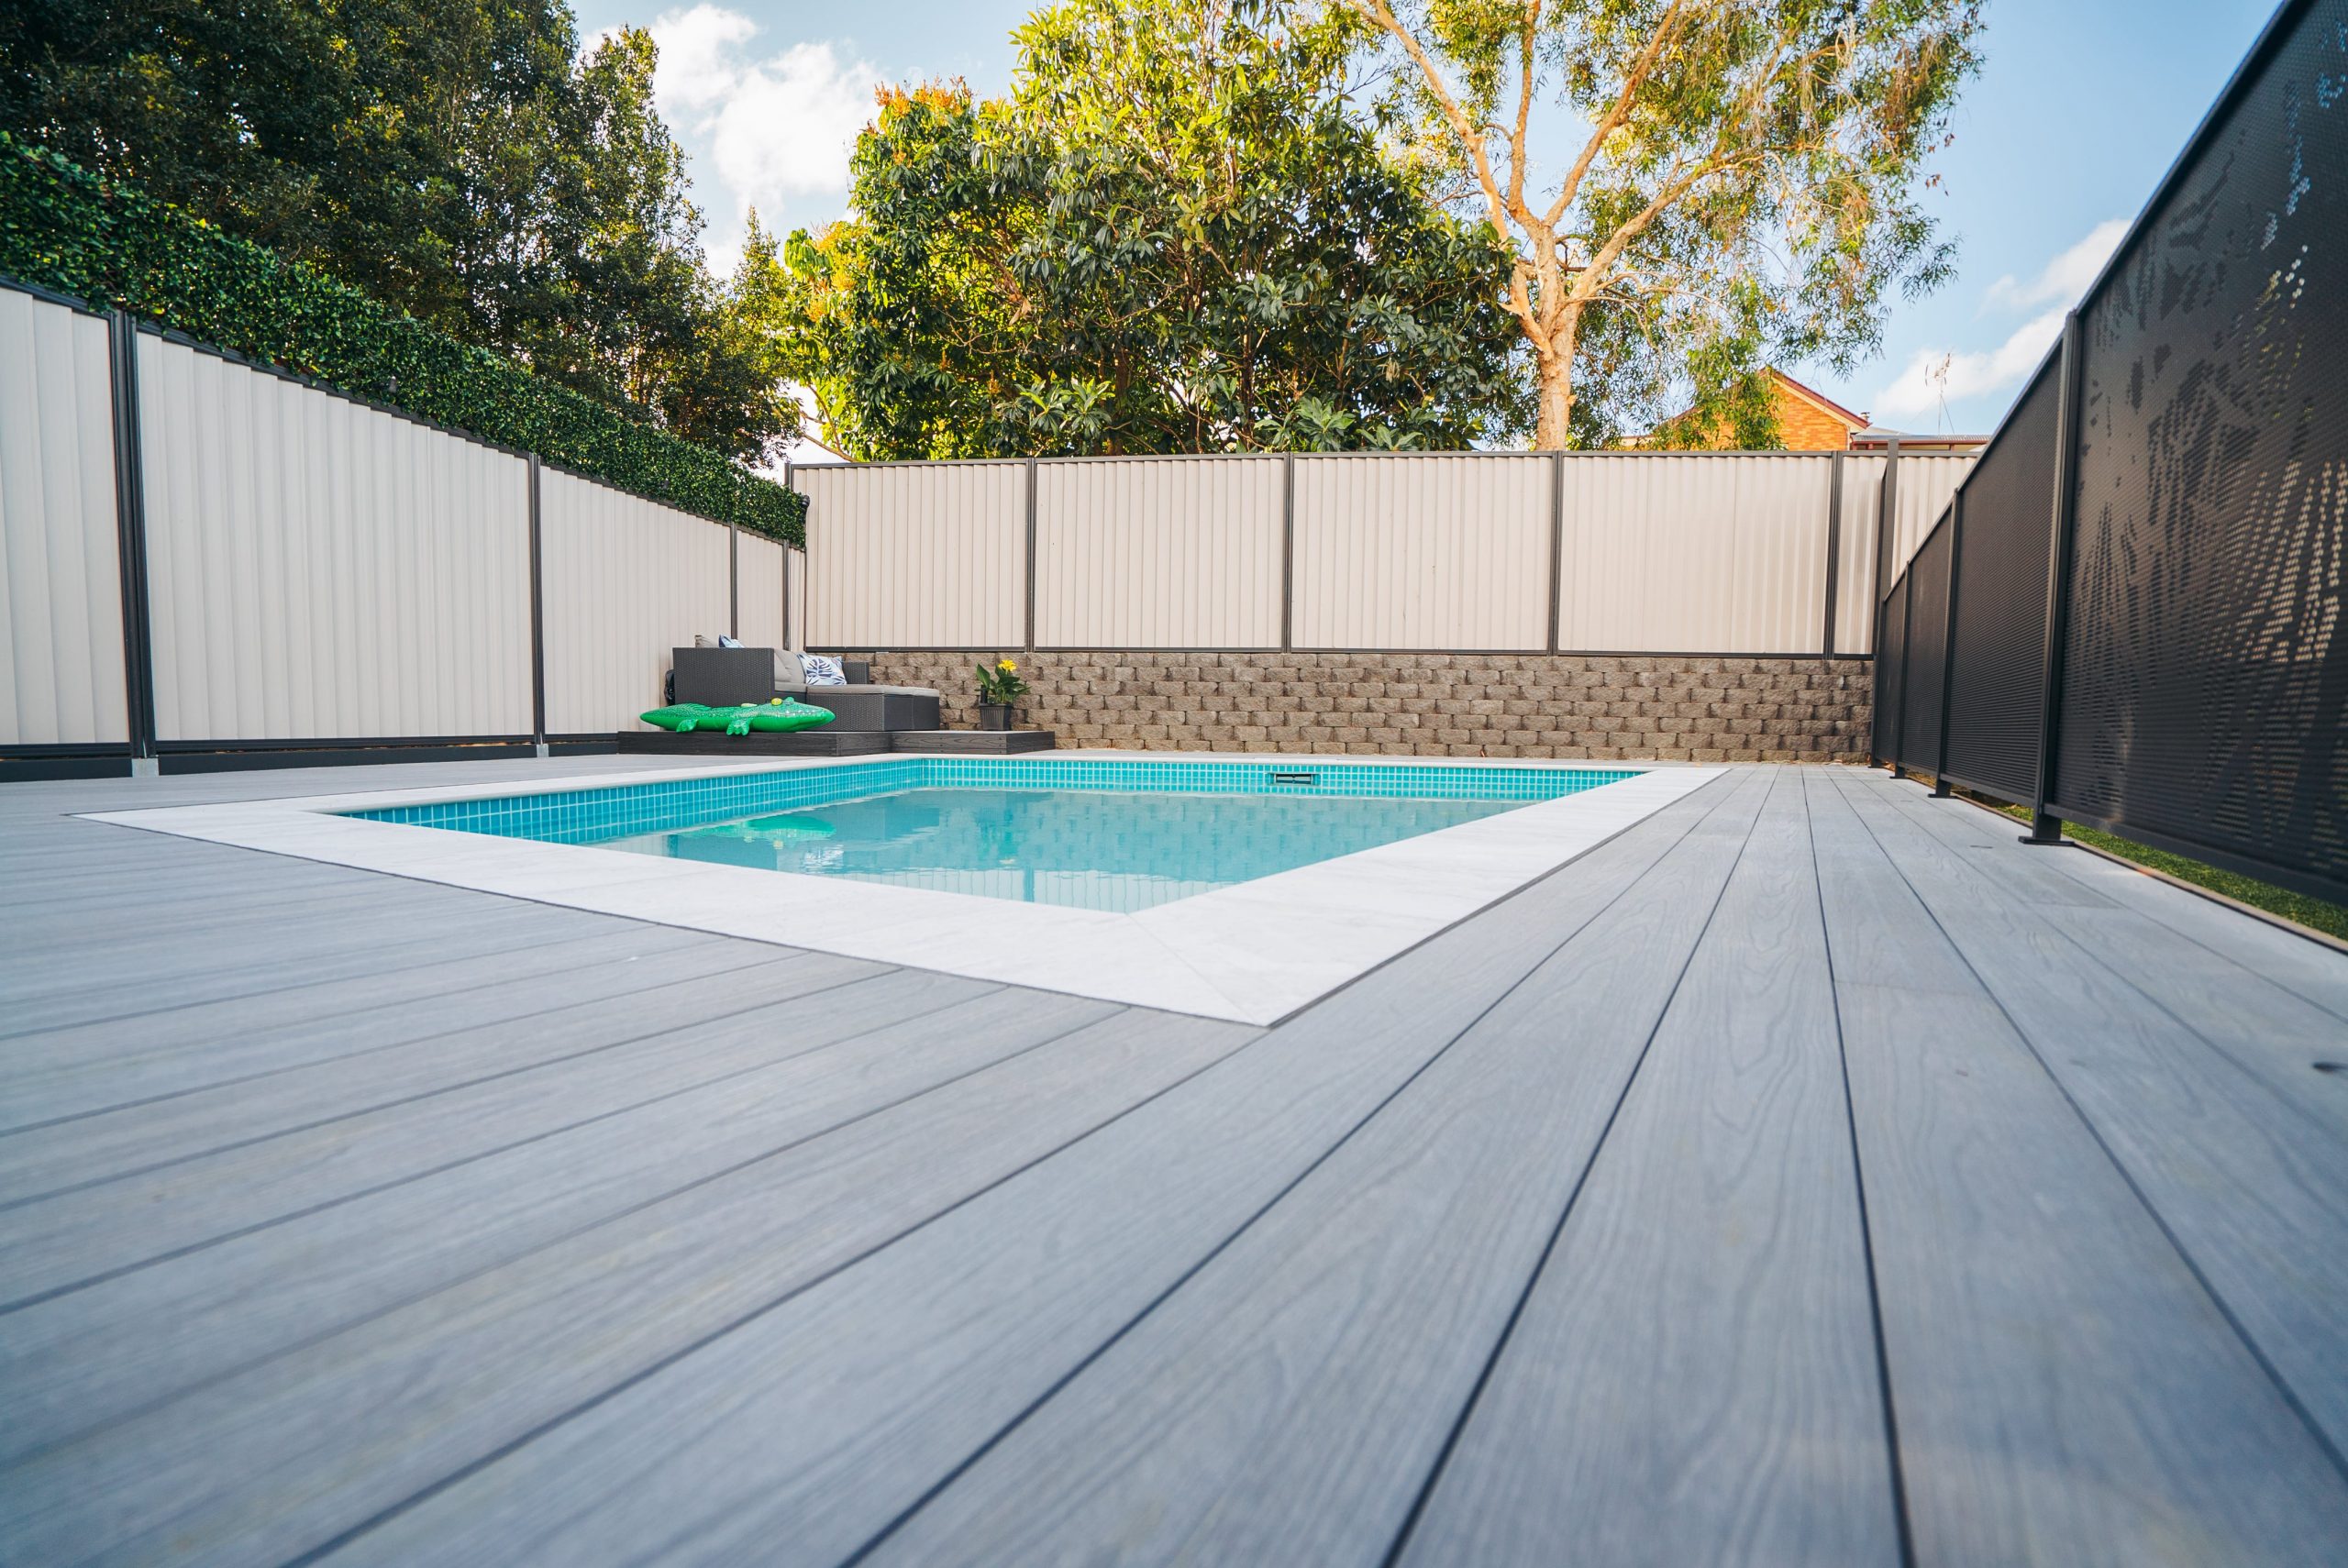 Mountain ash composite decking boards surrounding an in ground pool